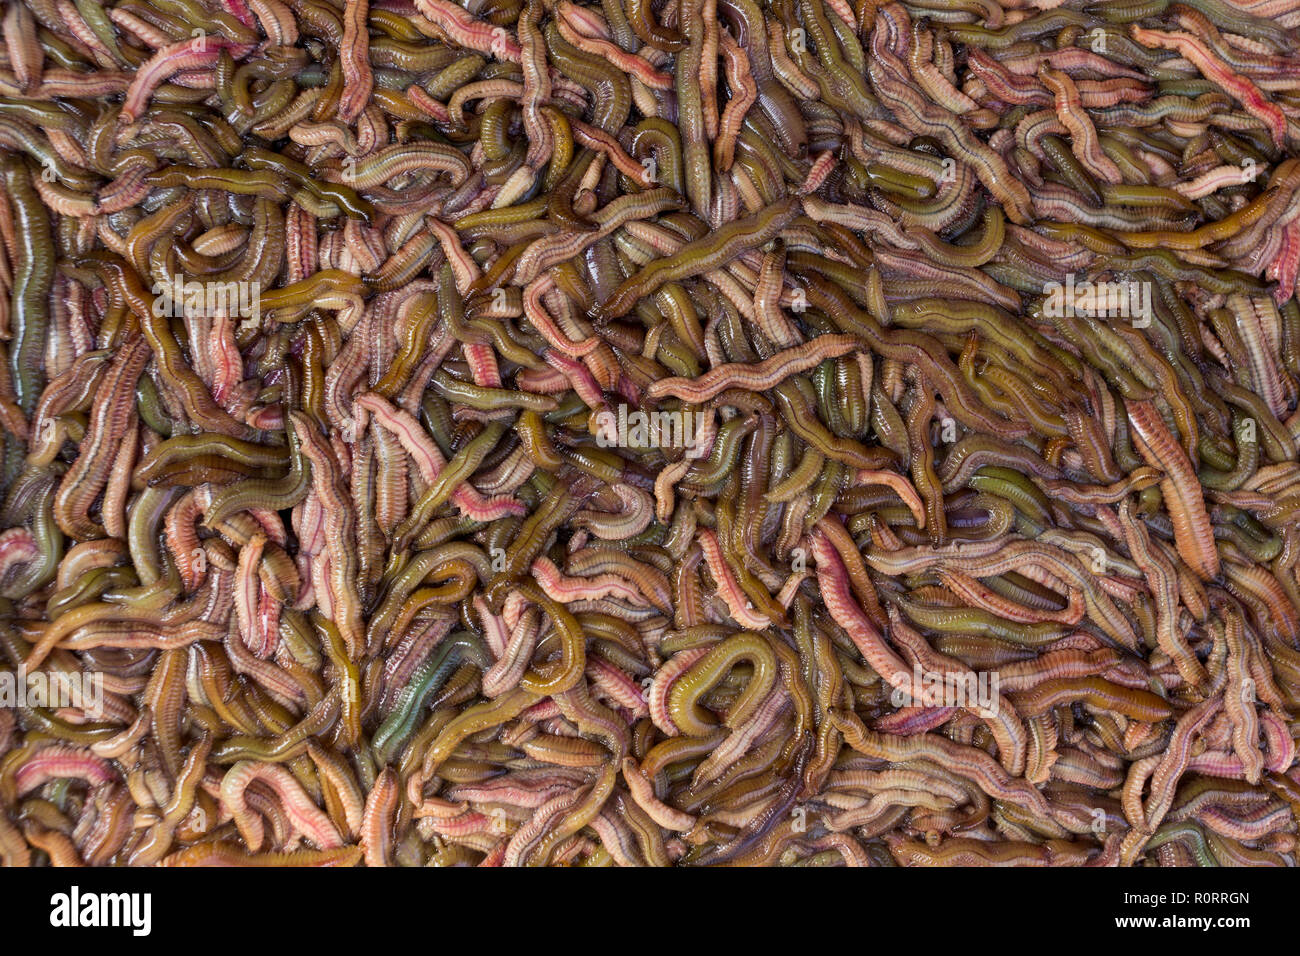 Sand worms in Vietnamese market, ingredient for local traditional food Stock Photo